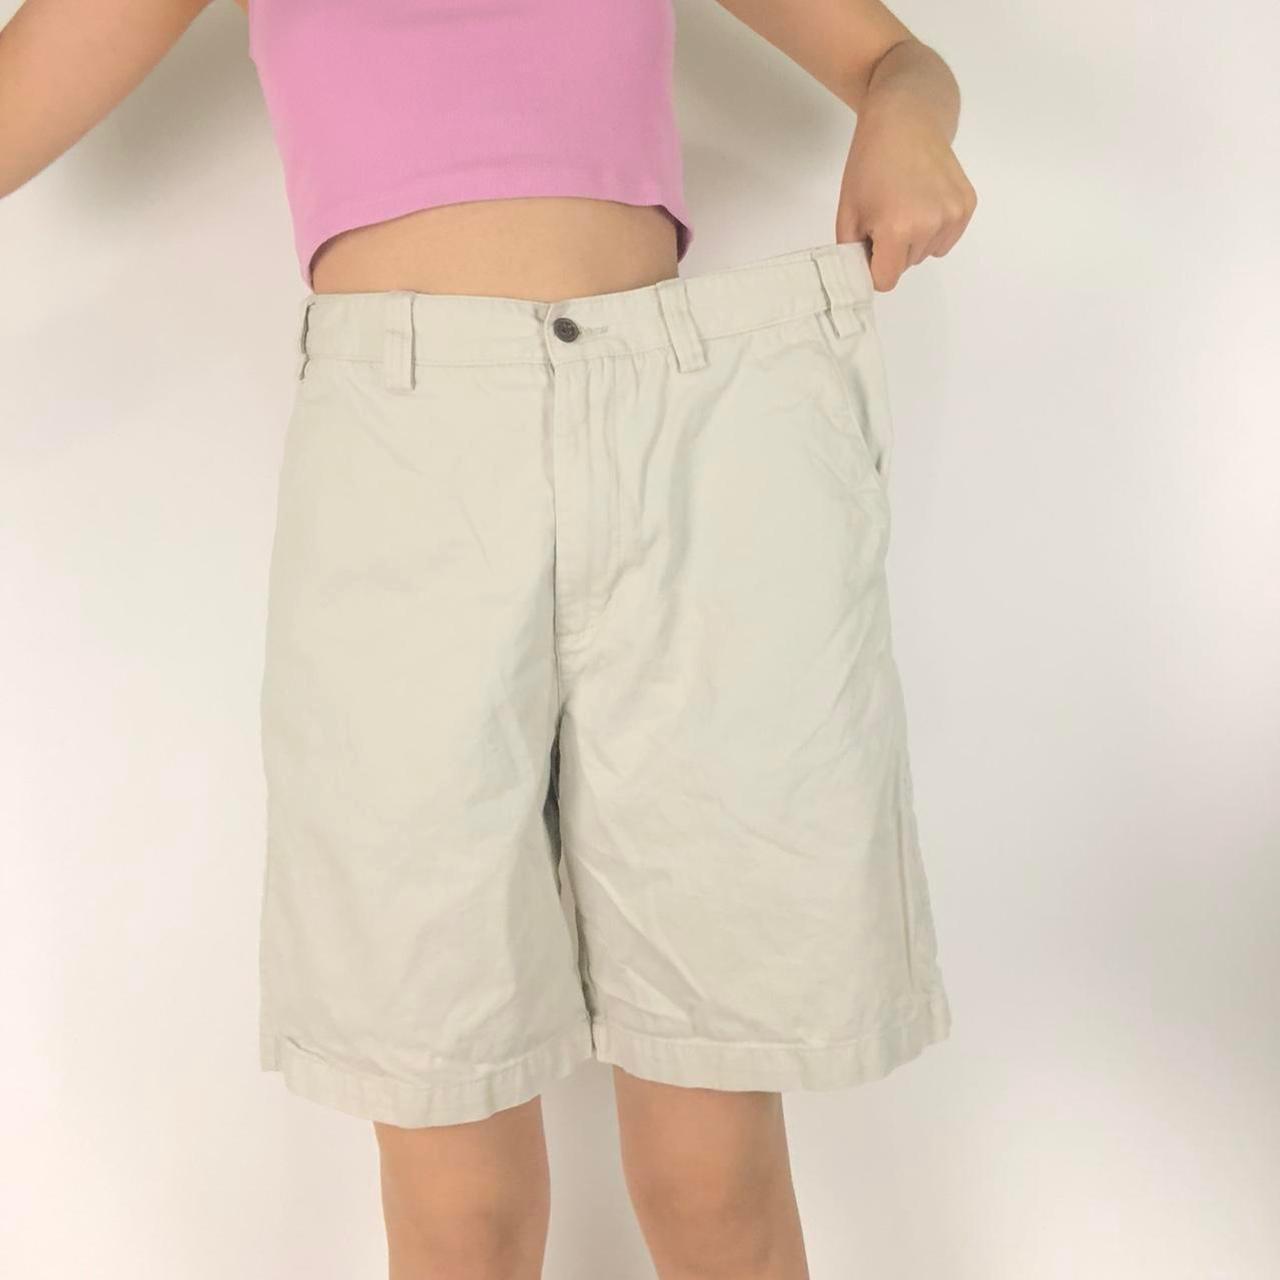 Product Image 3 - High waisted beige long shorts

These